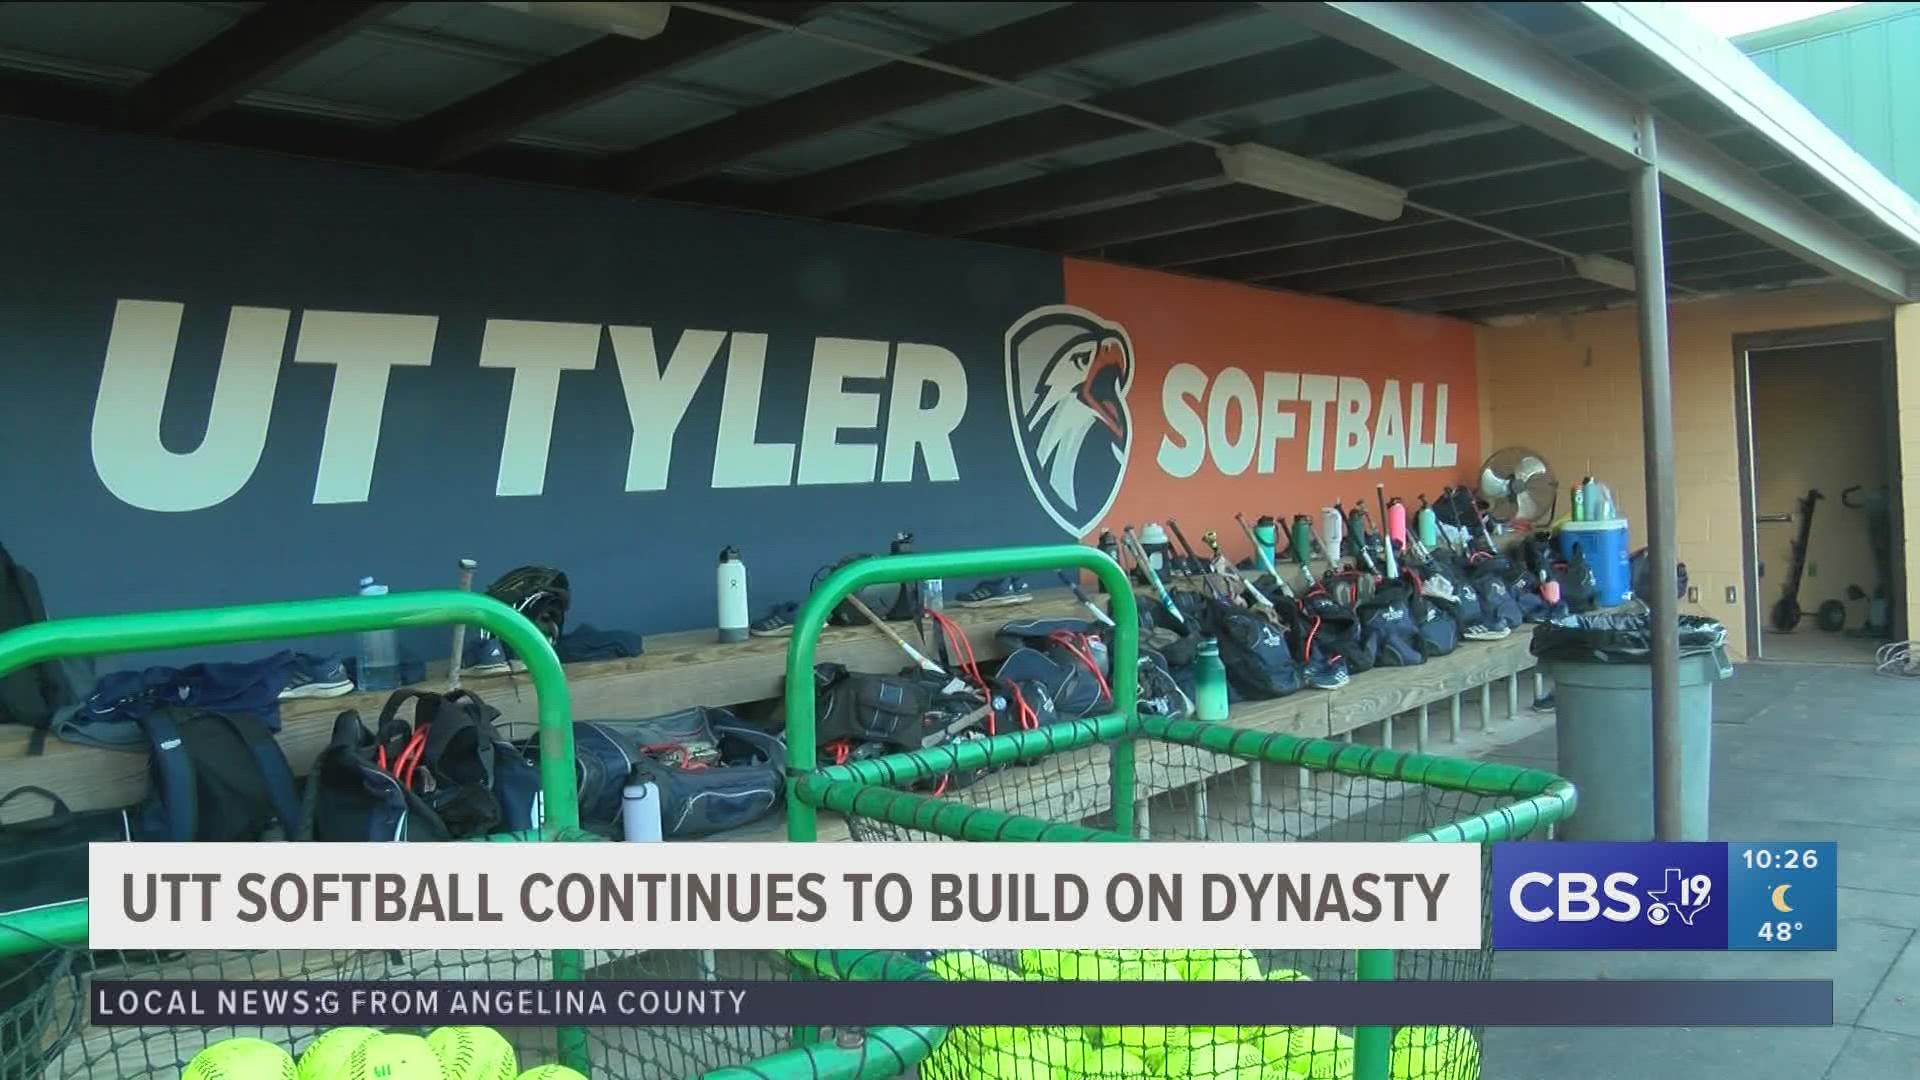 The UT Tyler Patriot softball program is gearing up for year 19, looking to defend their conference title.